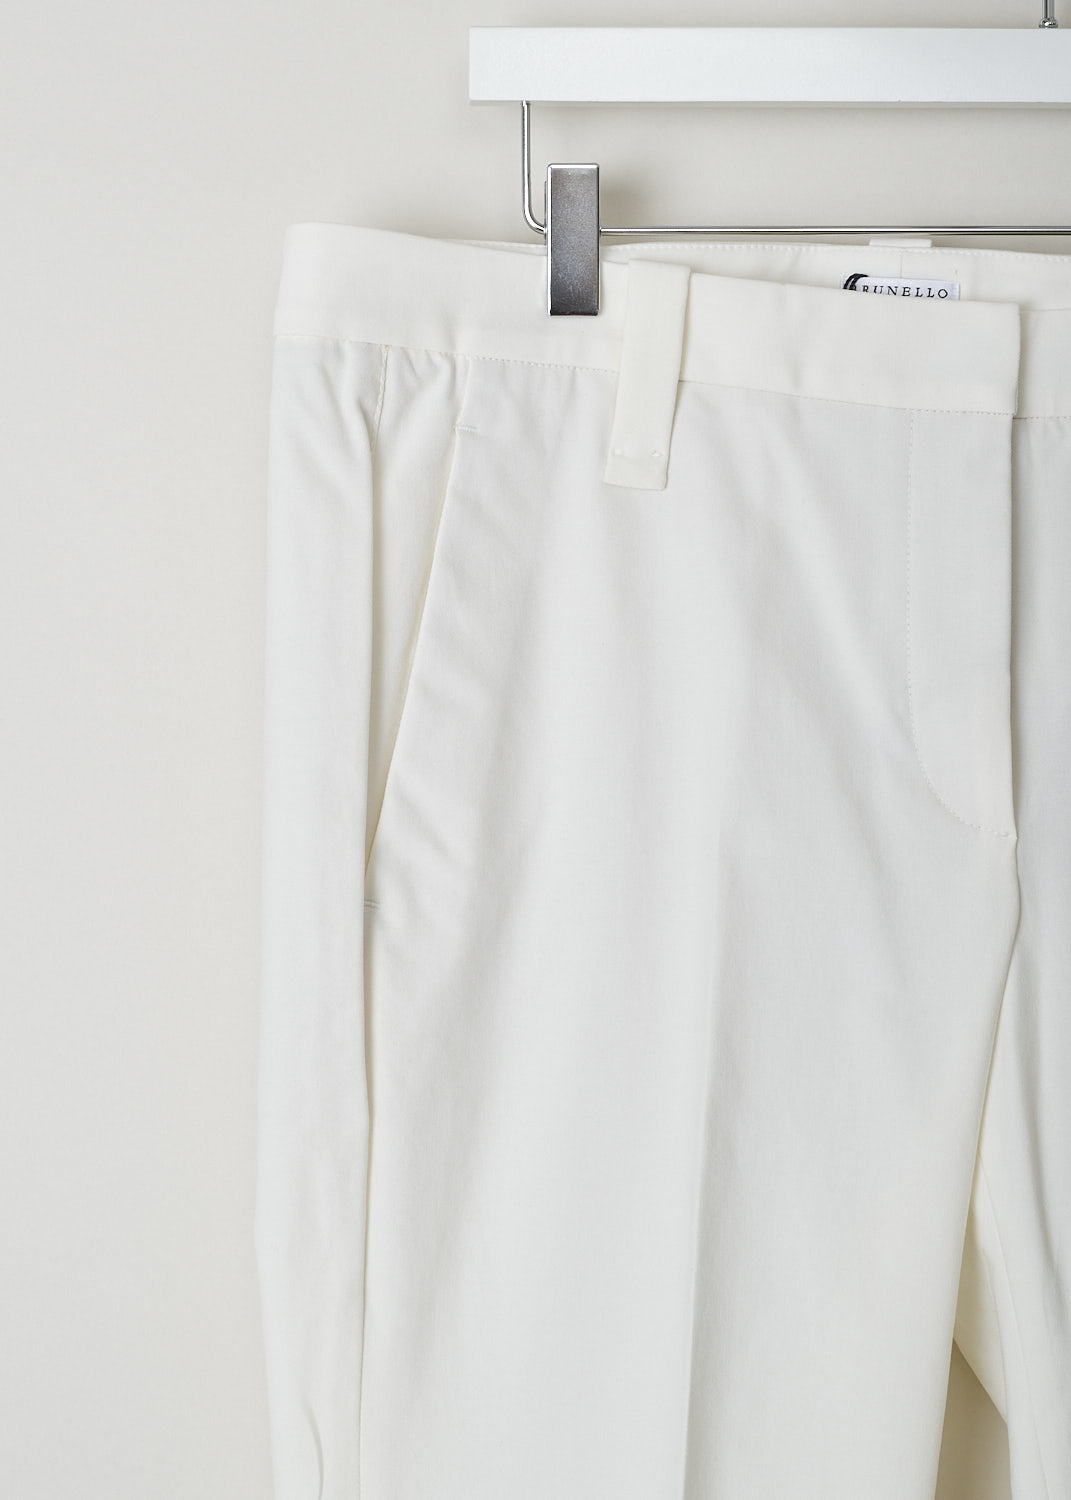 BRUNELLO CUCINELLI, WHITE CHINO WITH FOLD-OVER HEM, M0F70P1367_C7025, White, Detail, A white chino made of a cotton blend. Featuring a clasp and zip closure, forward slanted pockets in the front and welt pockets on the back. The belt loops are a bit broader than usual. The pants legs have a folded hem.
